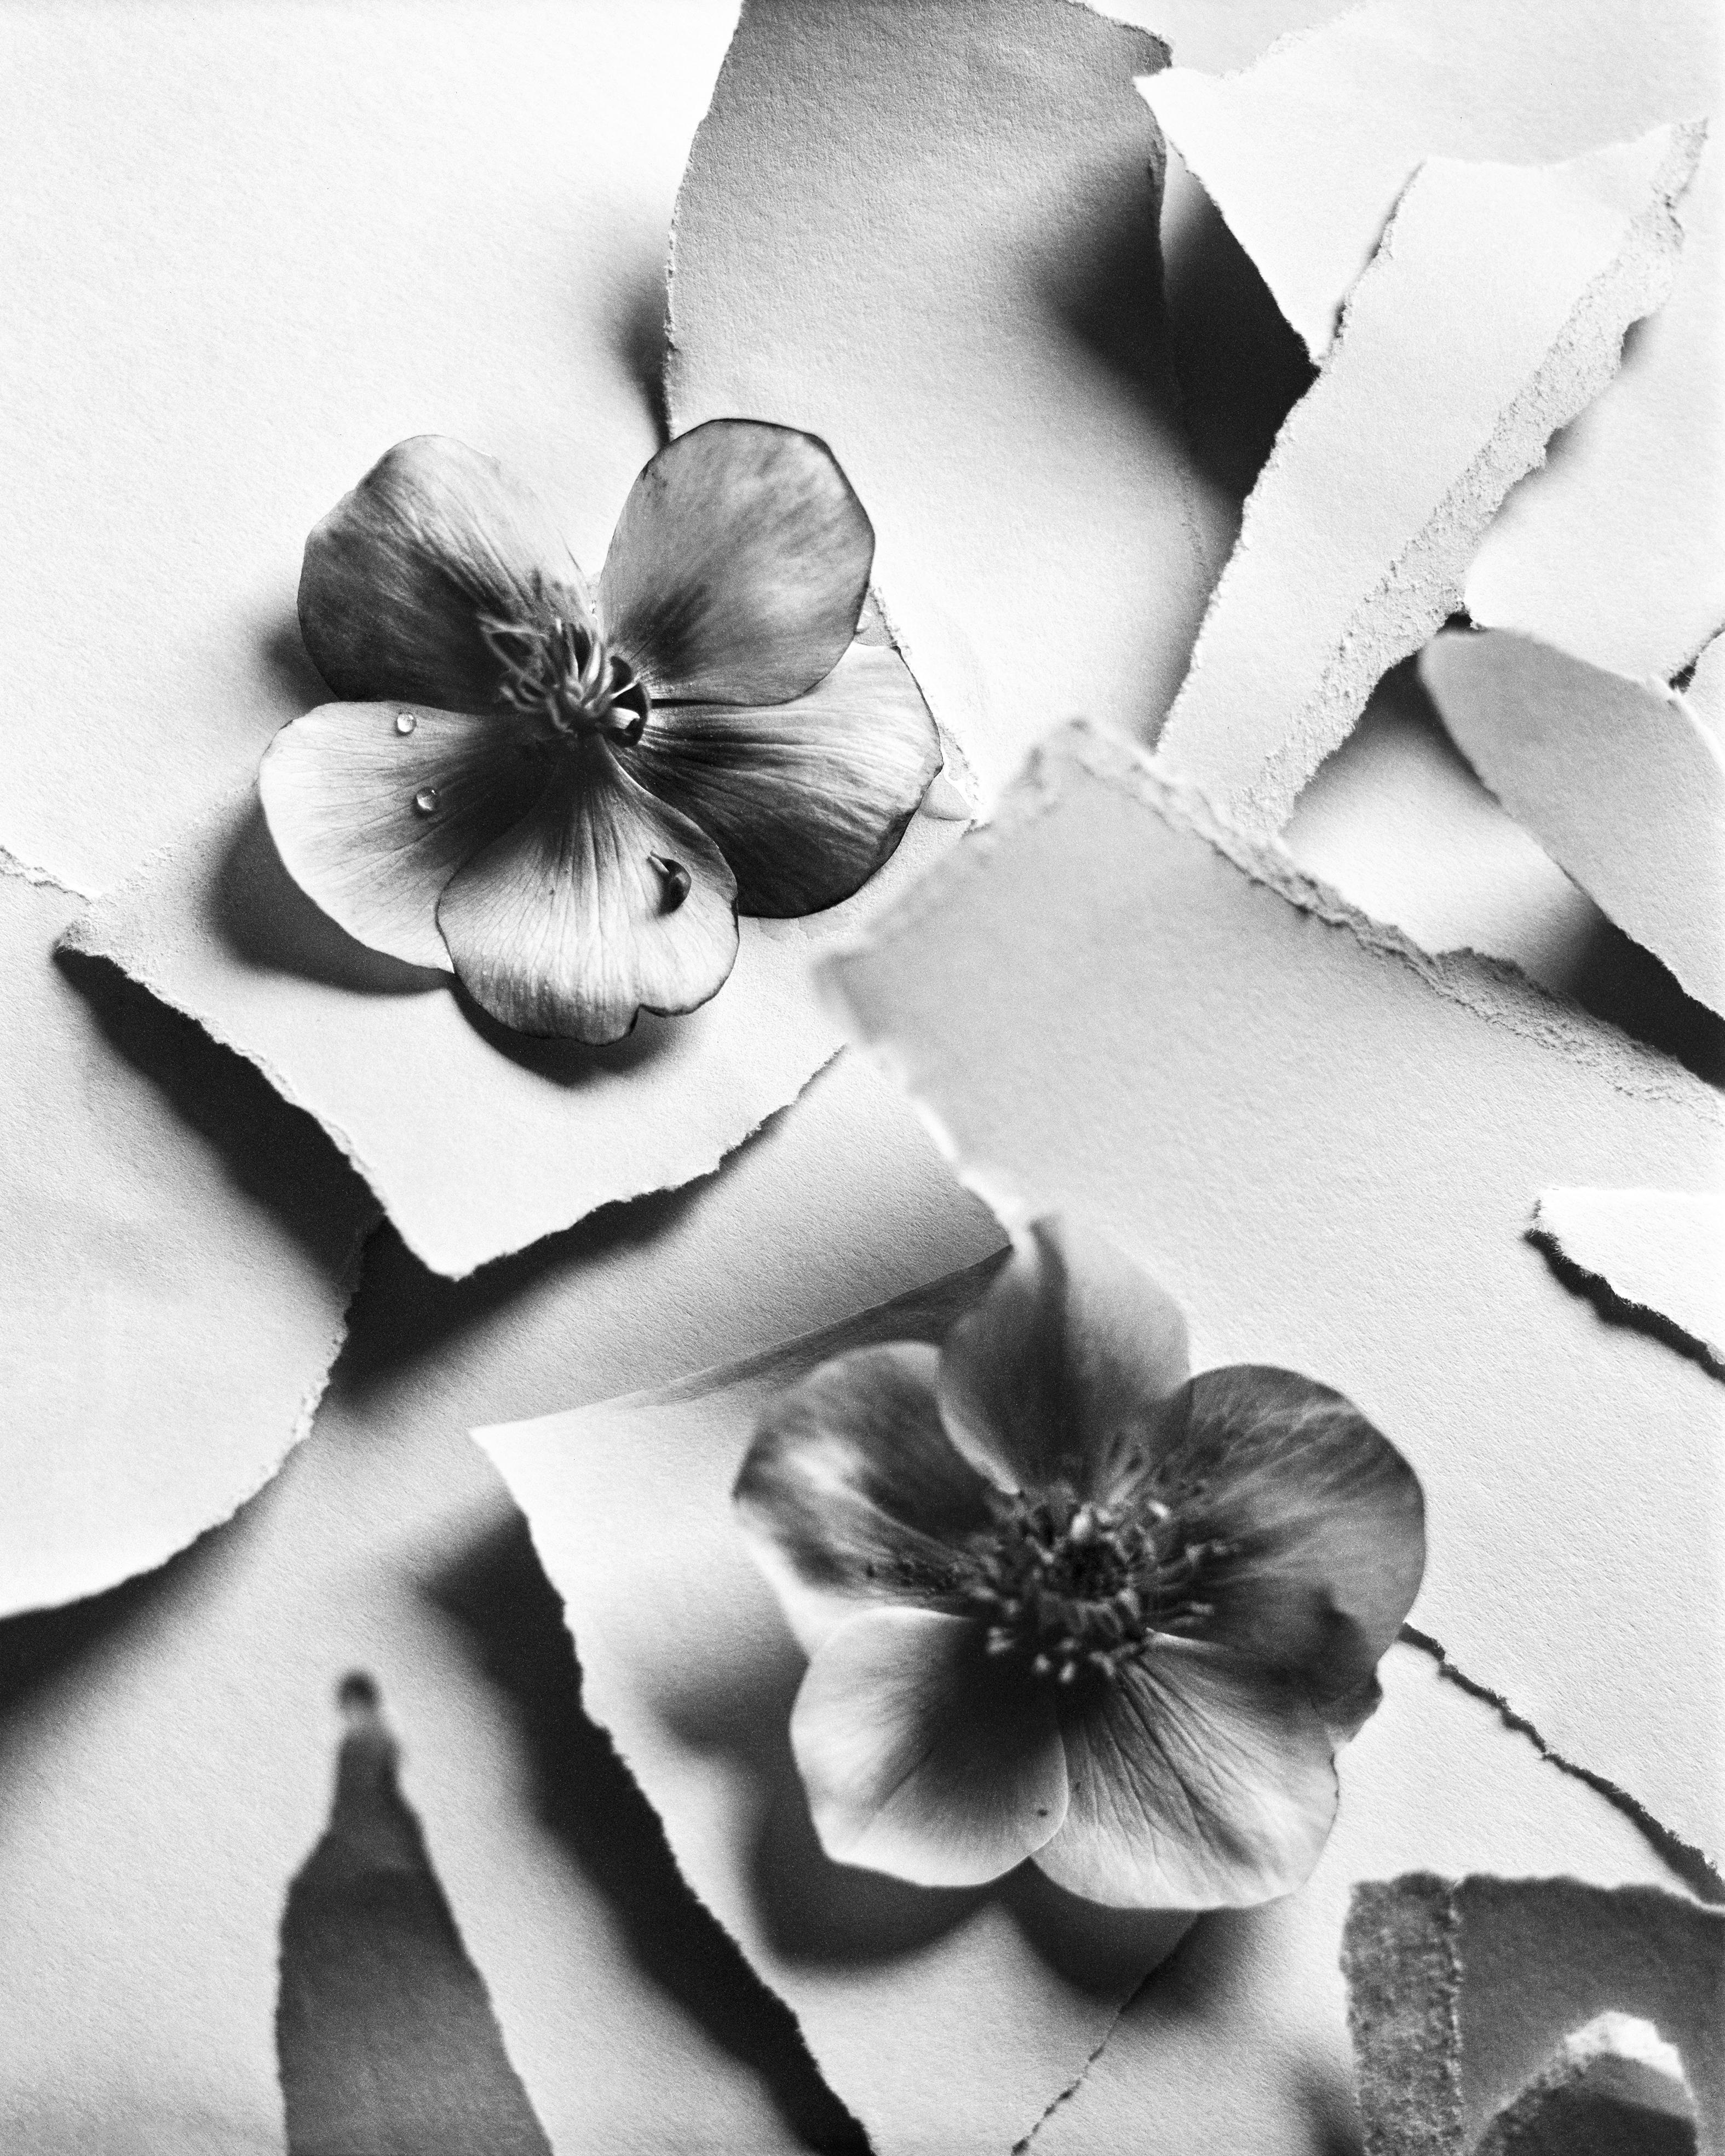 Ugne Pouwell Still-Life Photograph - Black Hellebore No.2 - analogue black and white floral photography